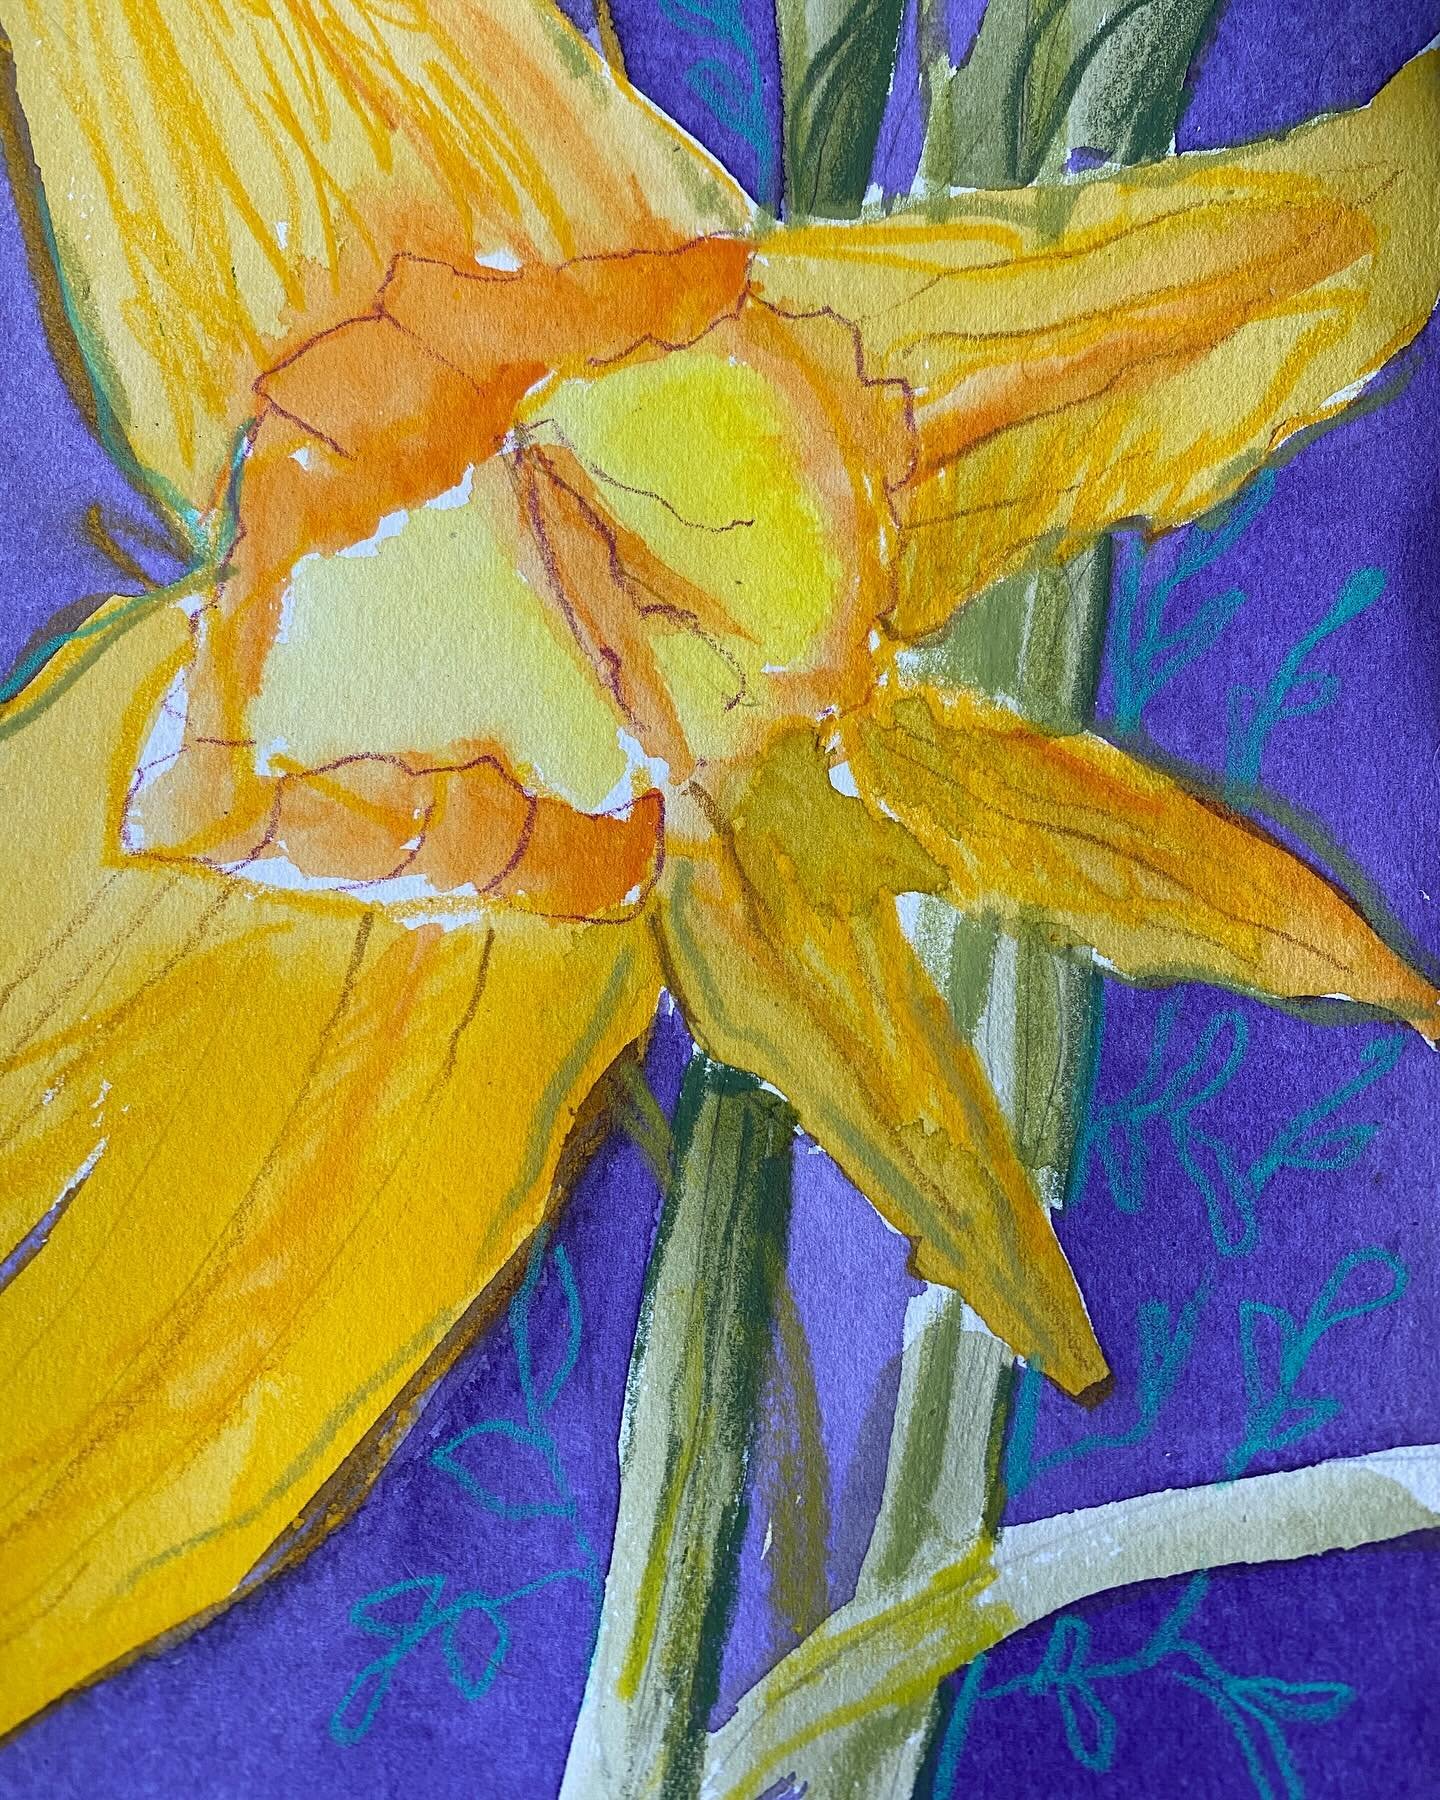 Day 61/100 #meltingpotflorals
Painting with watercolors on 250gsm, Rives BFK 22x30&rdquo; sheet to create a concertina sketchbook. This is the front cover. The interior is a macro look at daffodils while exploring mark making techniques. A full revea